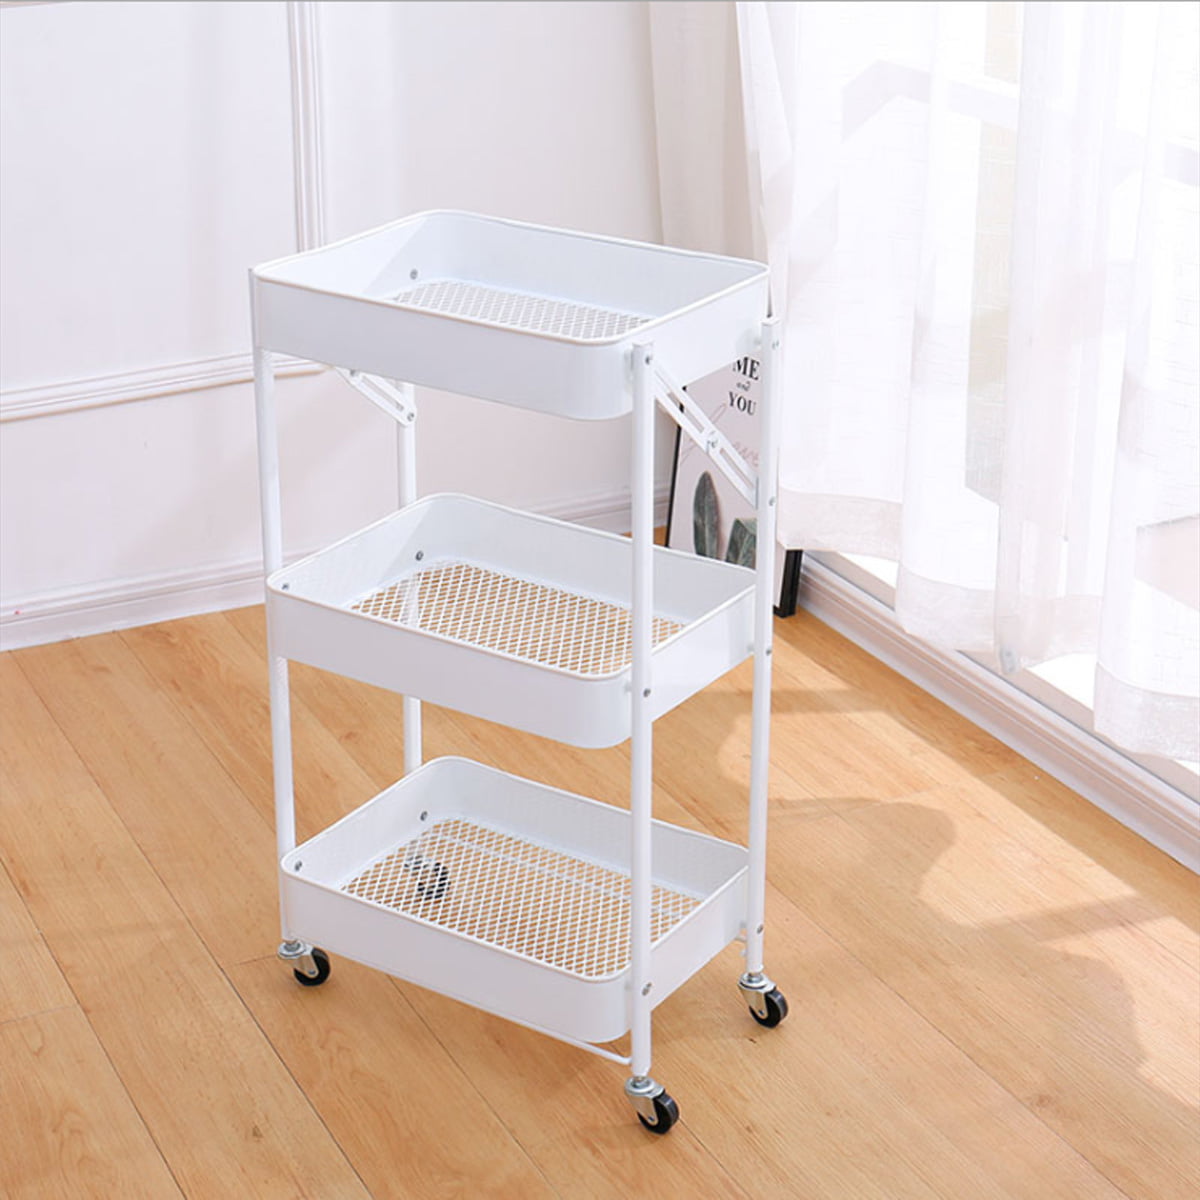 HERJOY Metal Utility Cart with Lockable Wheels Living Room 3-Tier Rolling Cart Office Storage Craft Art Cart Organizer Trolley Serving Cart Easy Assembly for Kitchen Bathroom 